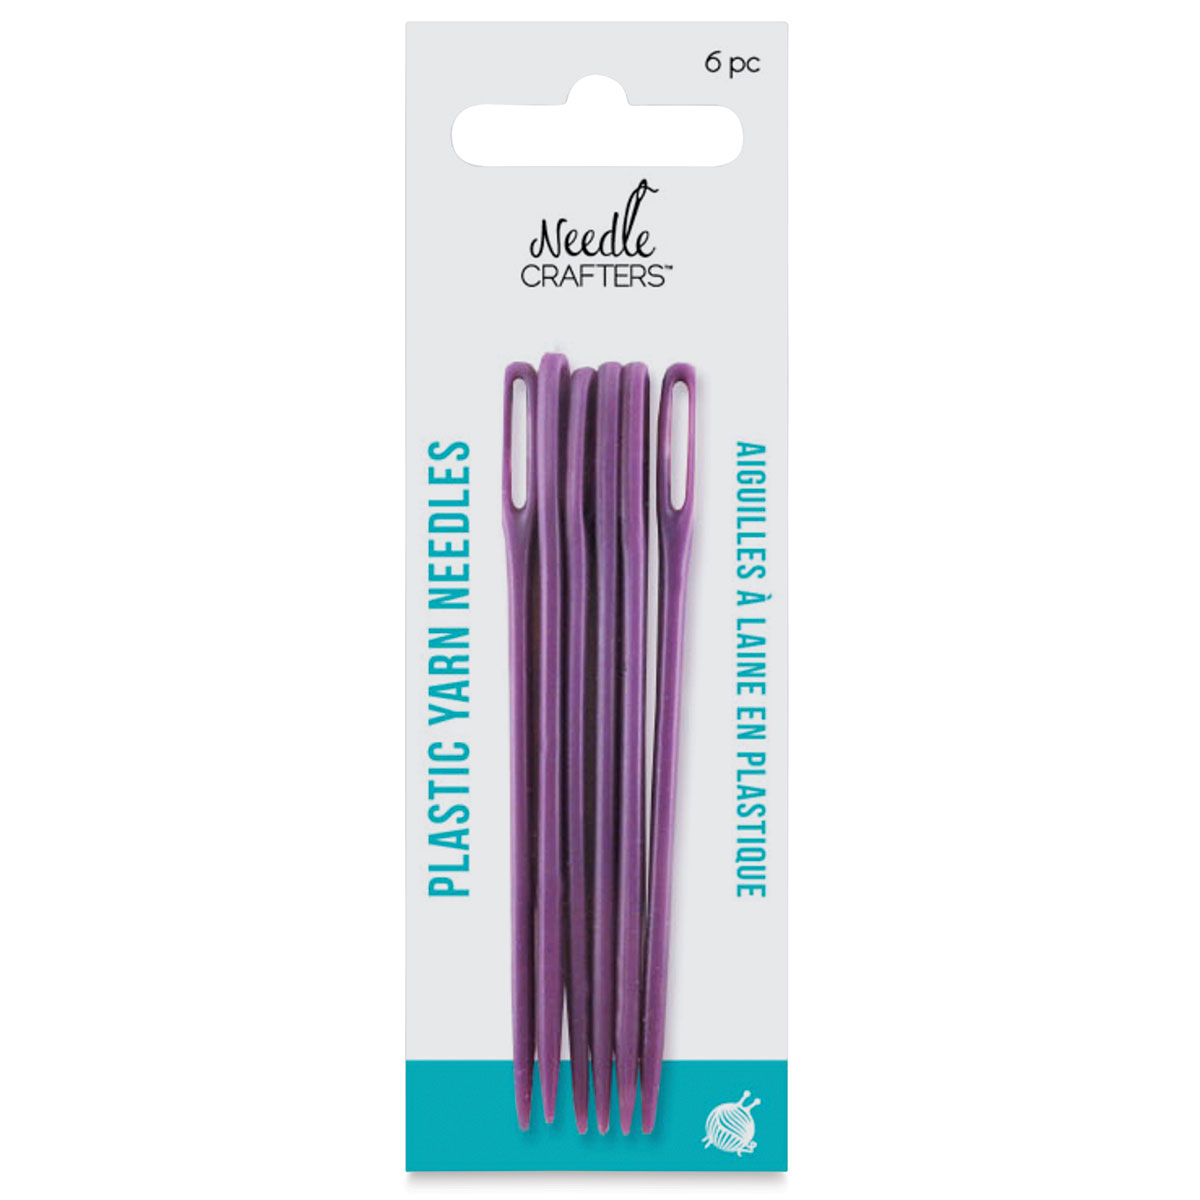 Needle Crafters Finishing Needles - Plastic, Package of 6